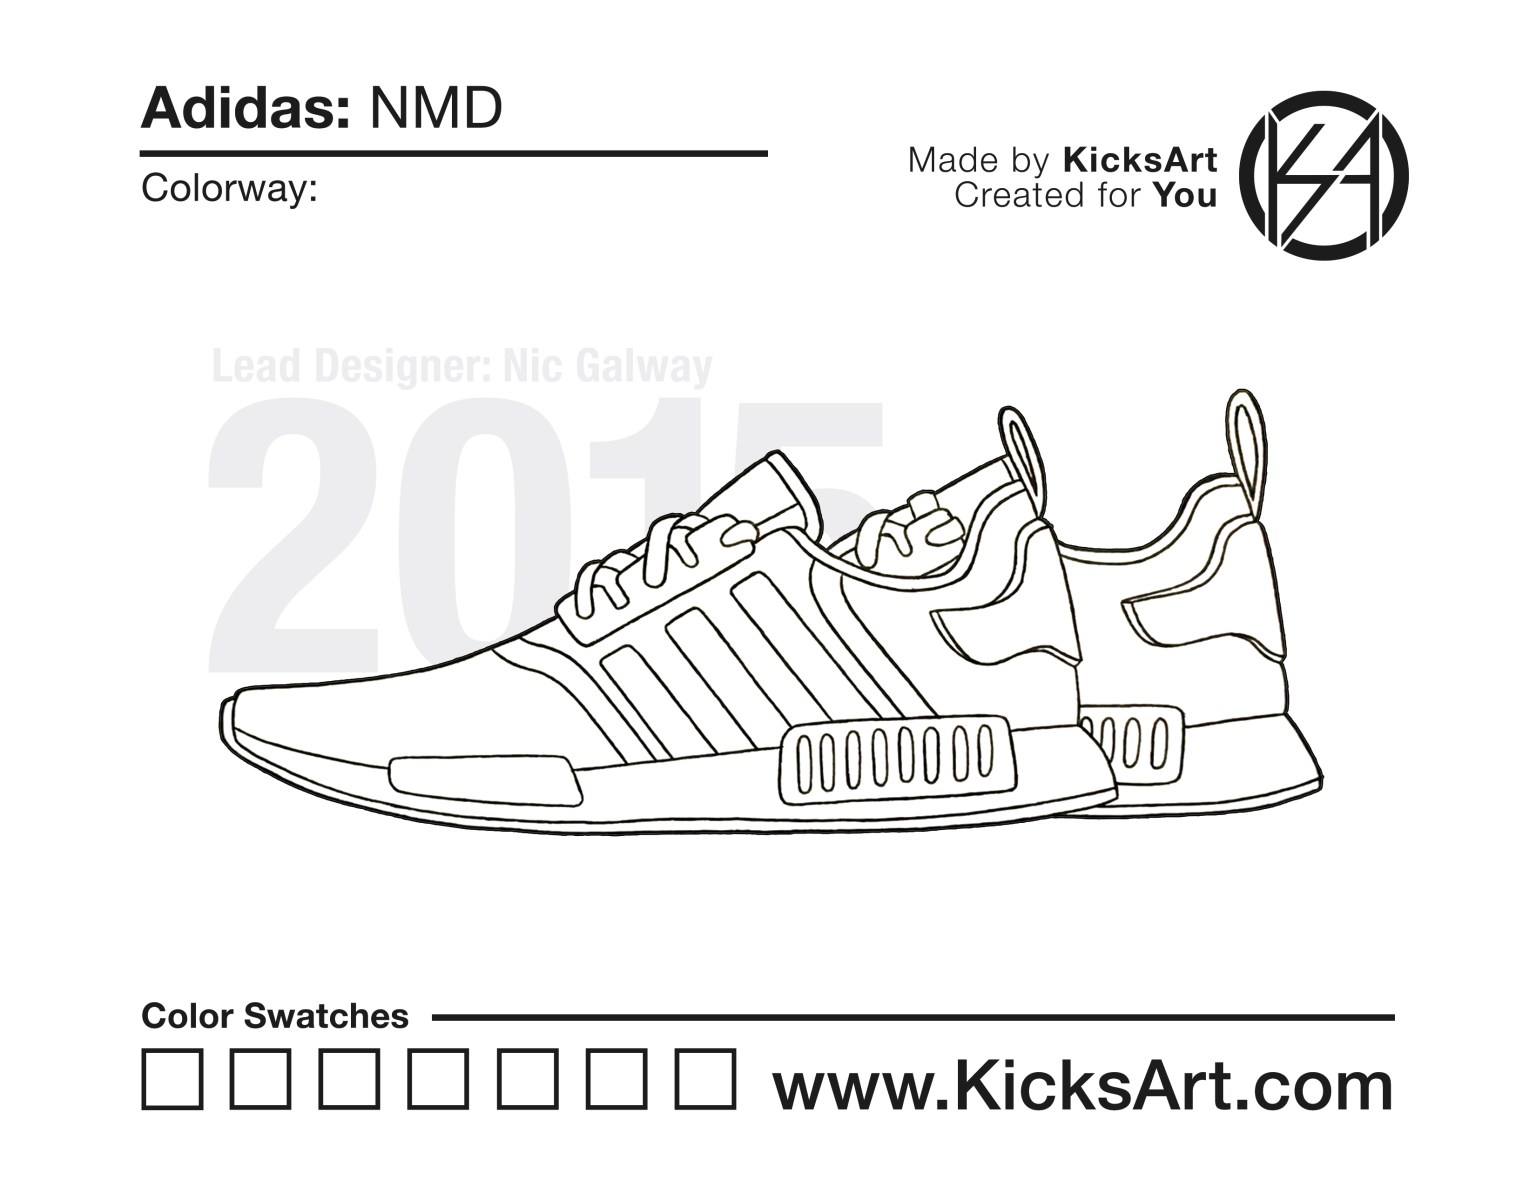 Adidas NMD Sneaker Coloring Pages - Created by KicksArt